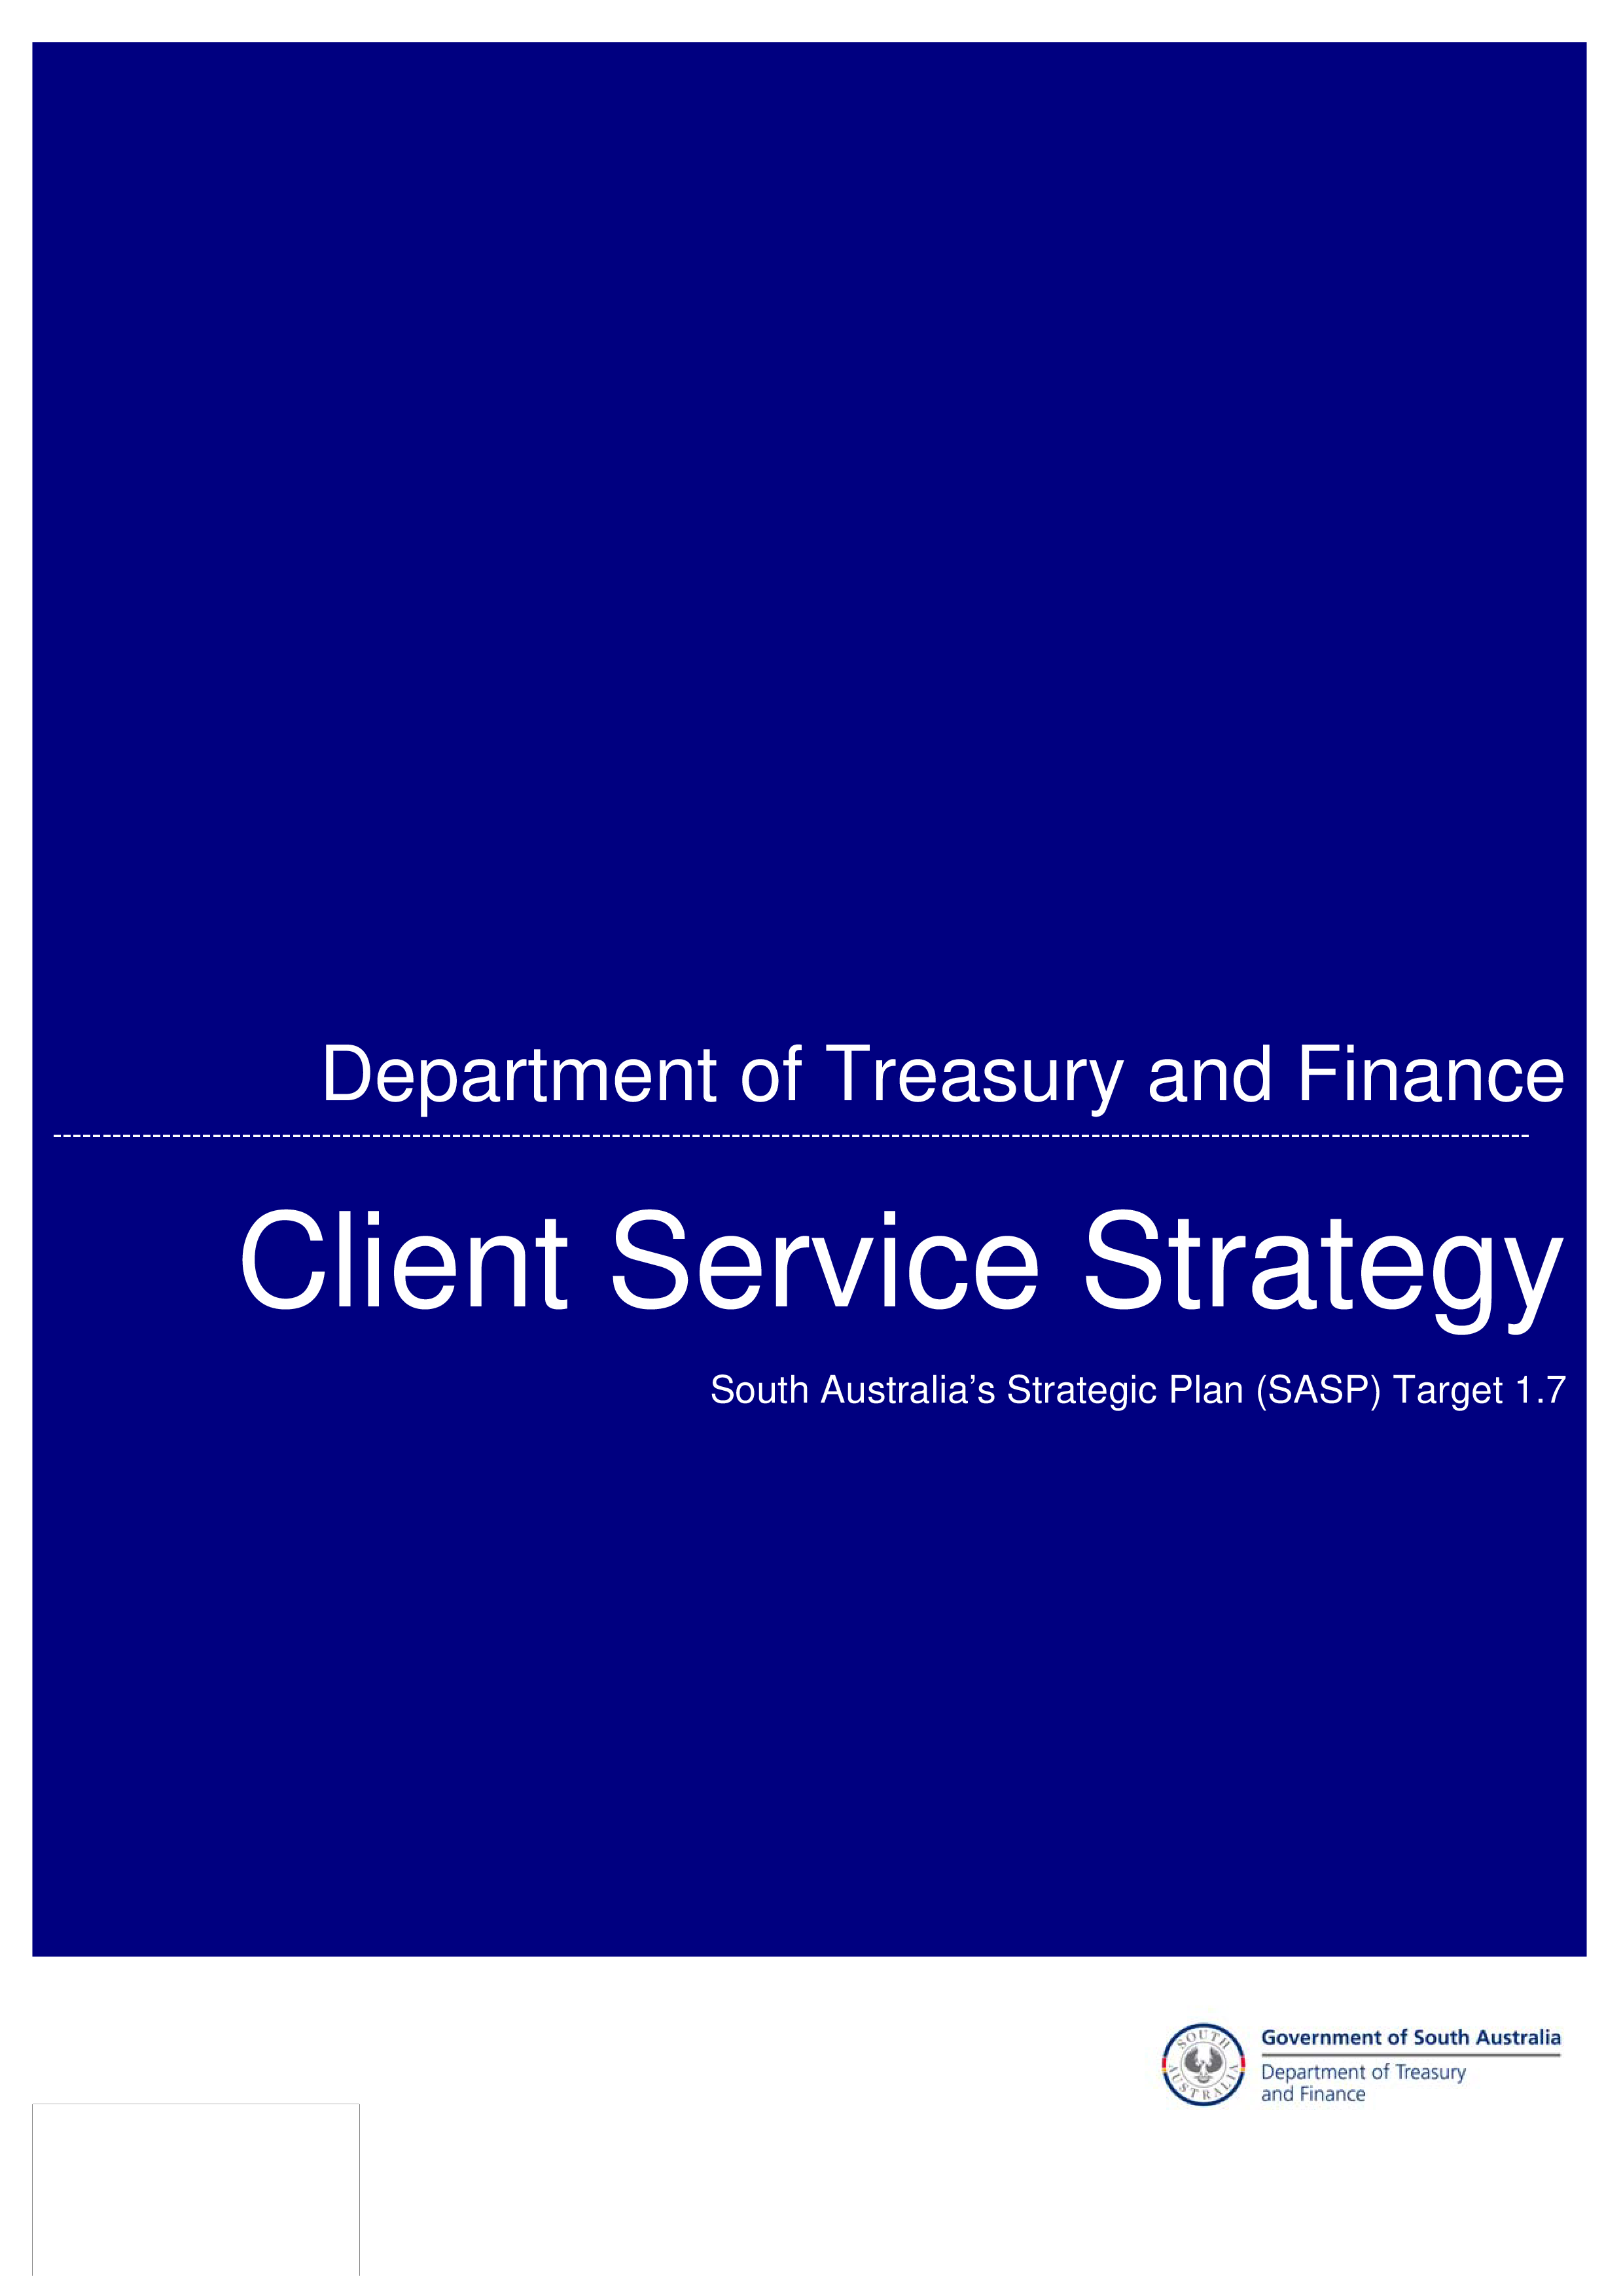 Client Service Strategy main image